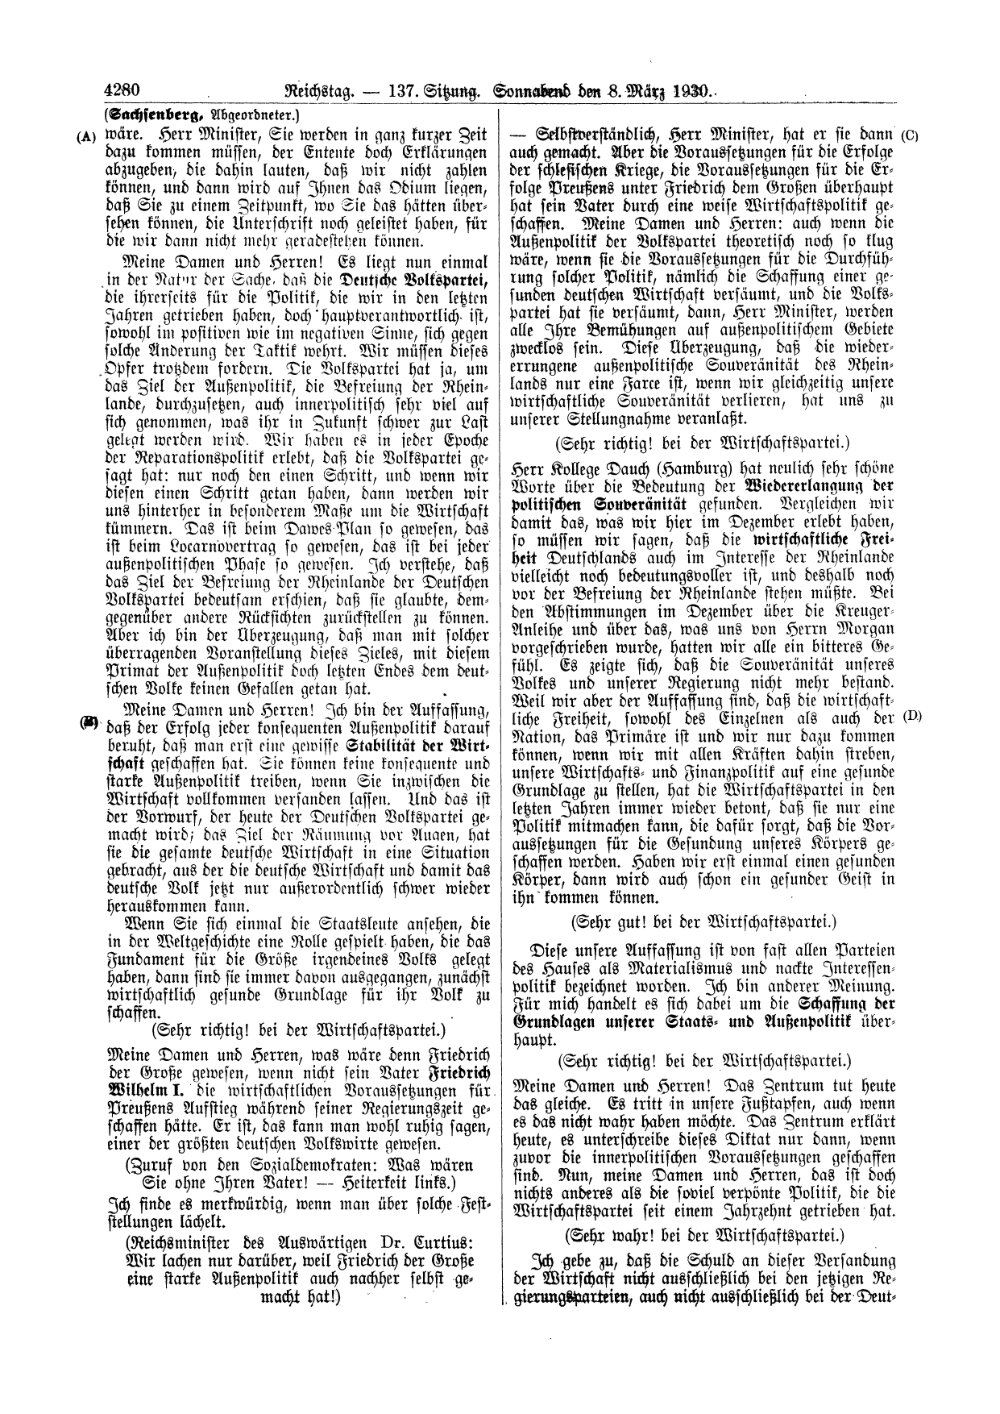 Scan of page 4280